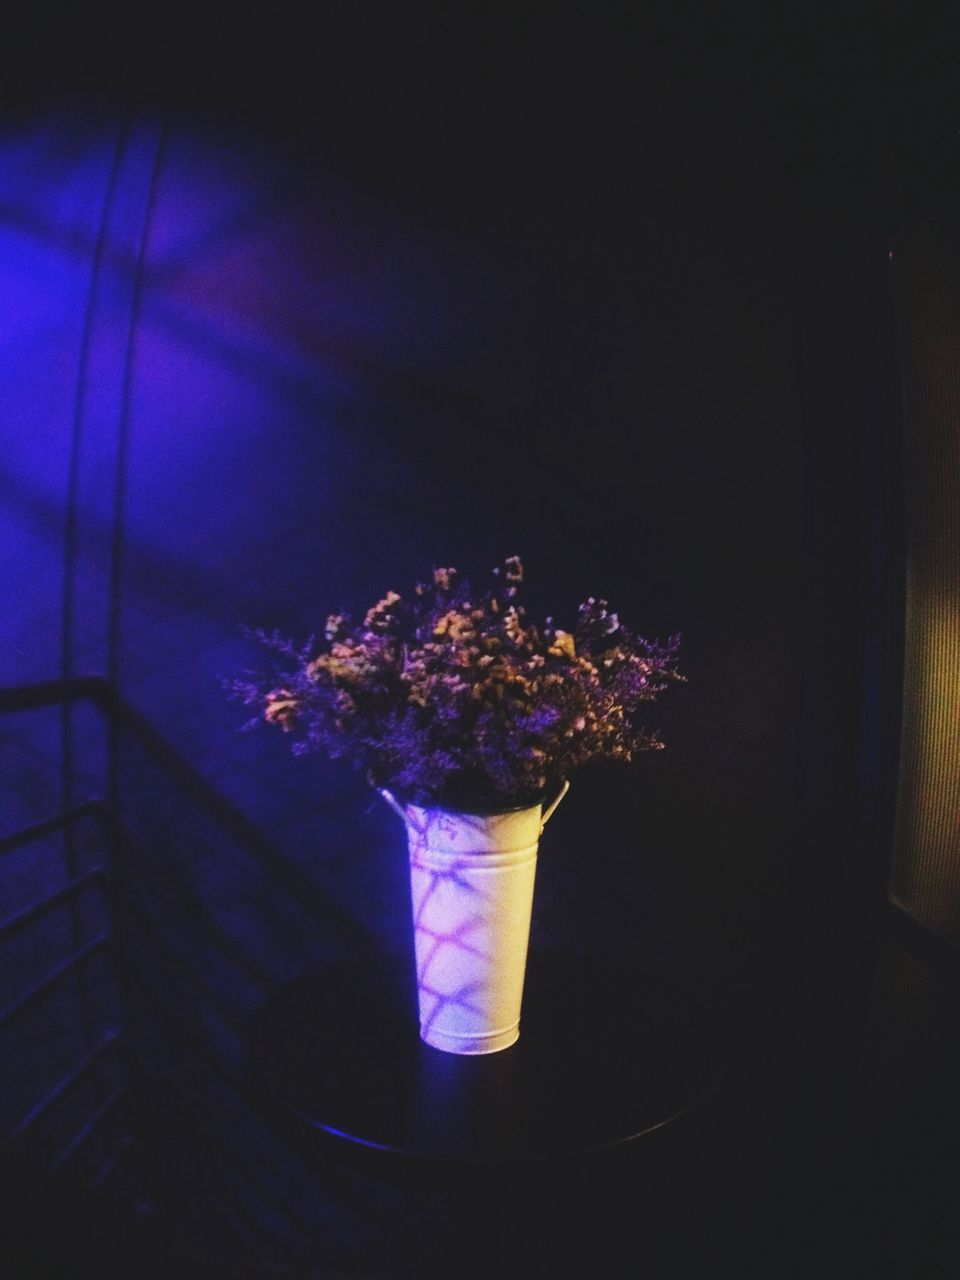 flower, indoors, illuminated, night, purple, celebration, decoration, lighting equipment, dark, pink color, freshness, fragility, home interior, vase, copy space, multi colored, close-up, bunch of flowers, light - natural phenomenon, high angle view